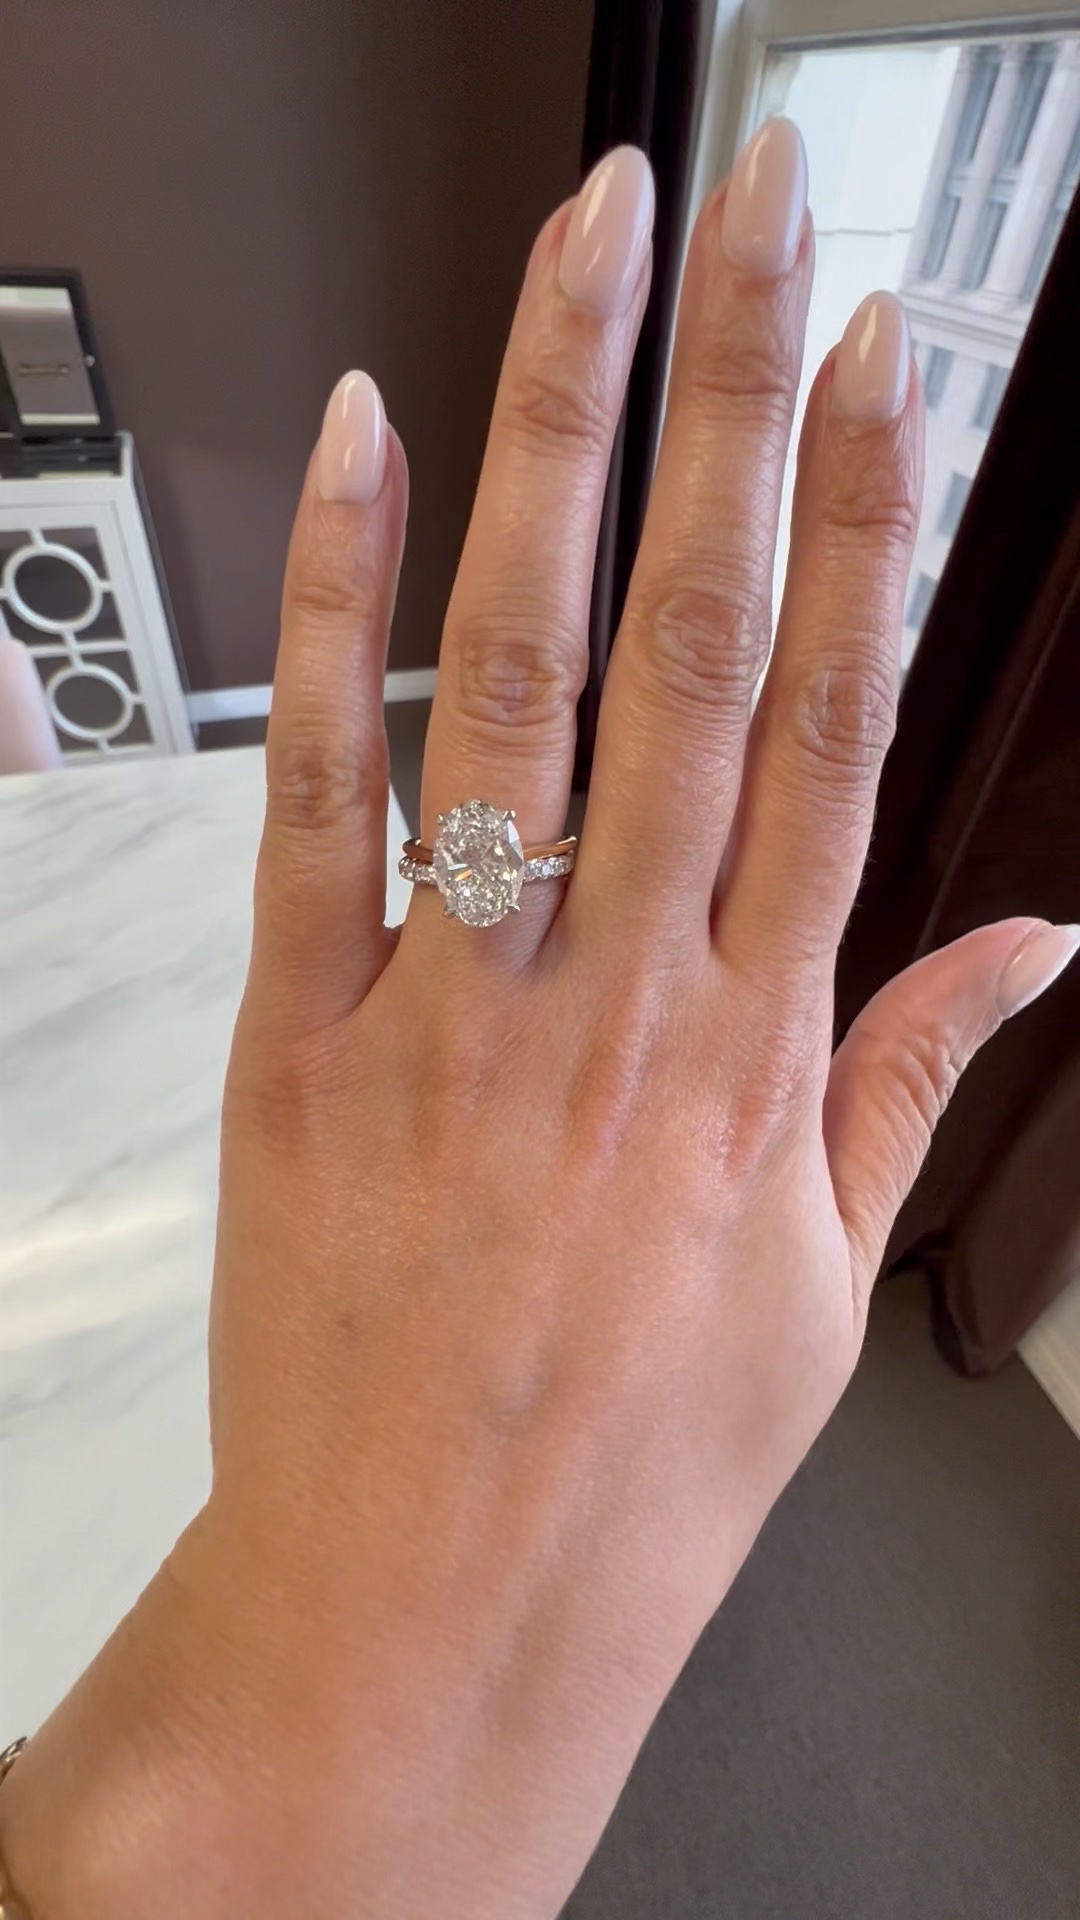 The best engagement rings – How to choose an engagement ring